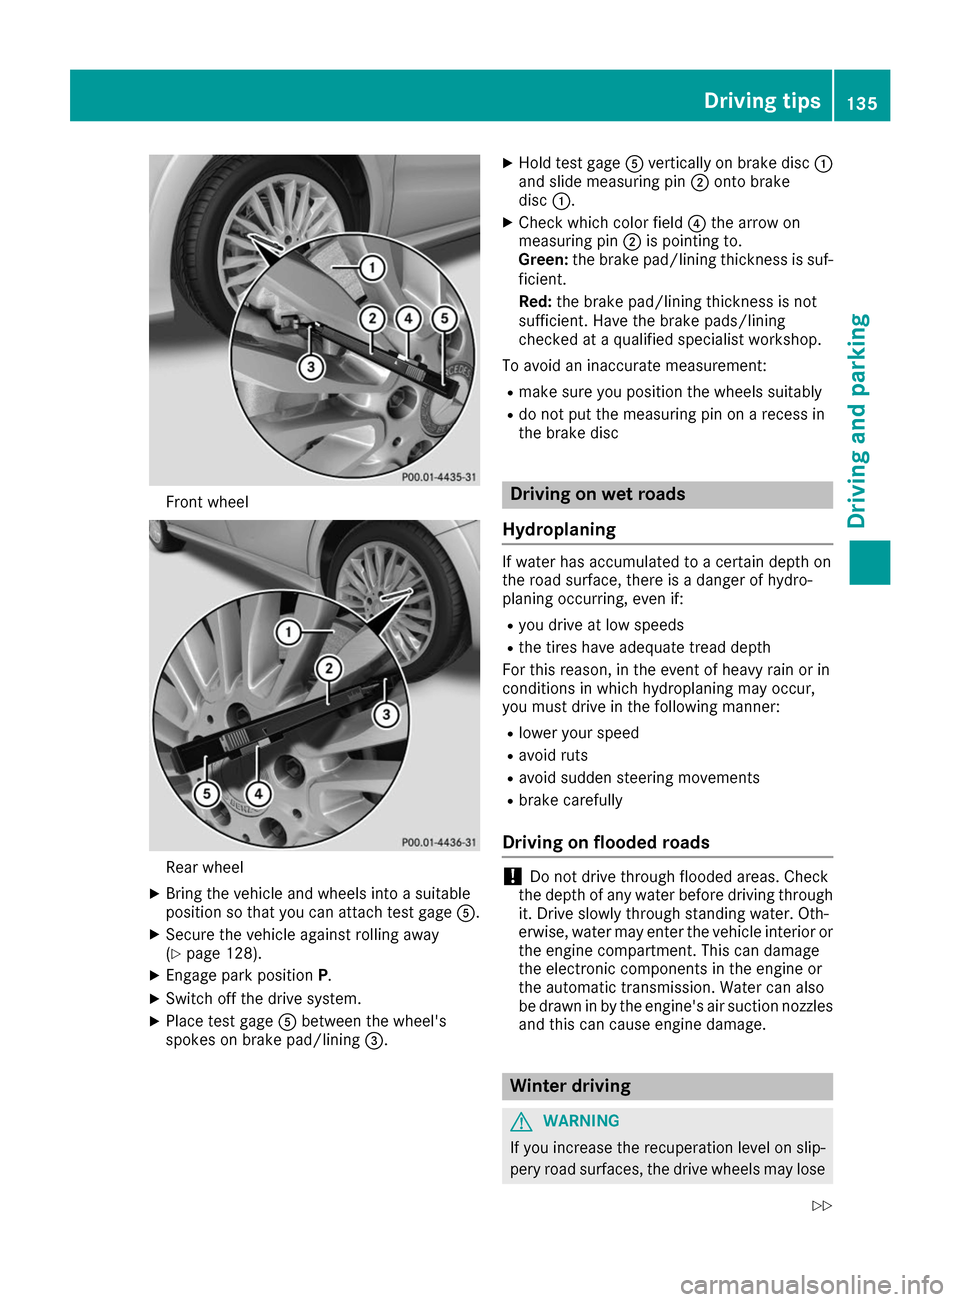 MERCEDES-BENZ B-Class 2017 W246 Owners Guide Front wheel
Rear wheel
X Bring the vehicle and wheels into a suitable
position so that you can attach test gage 0083.
X Secure the vehicle against rolling away
(Y page 128).
X Engage park position P.
